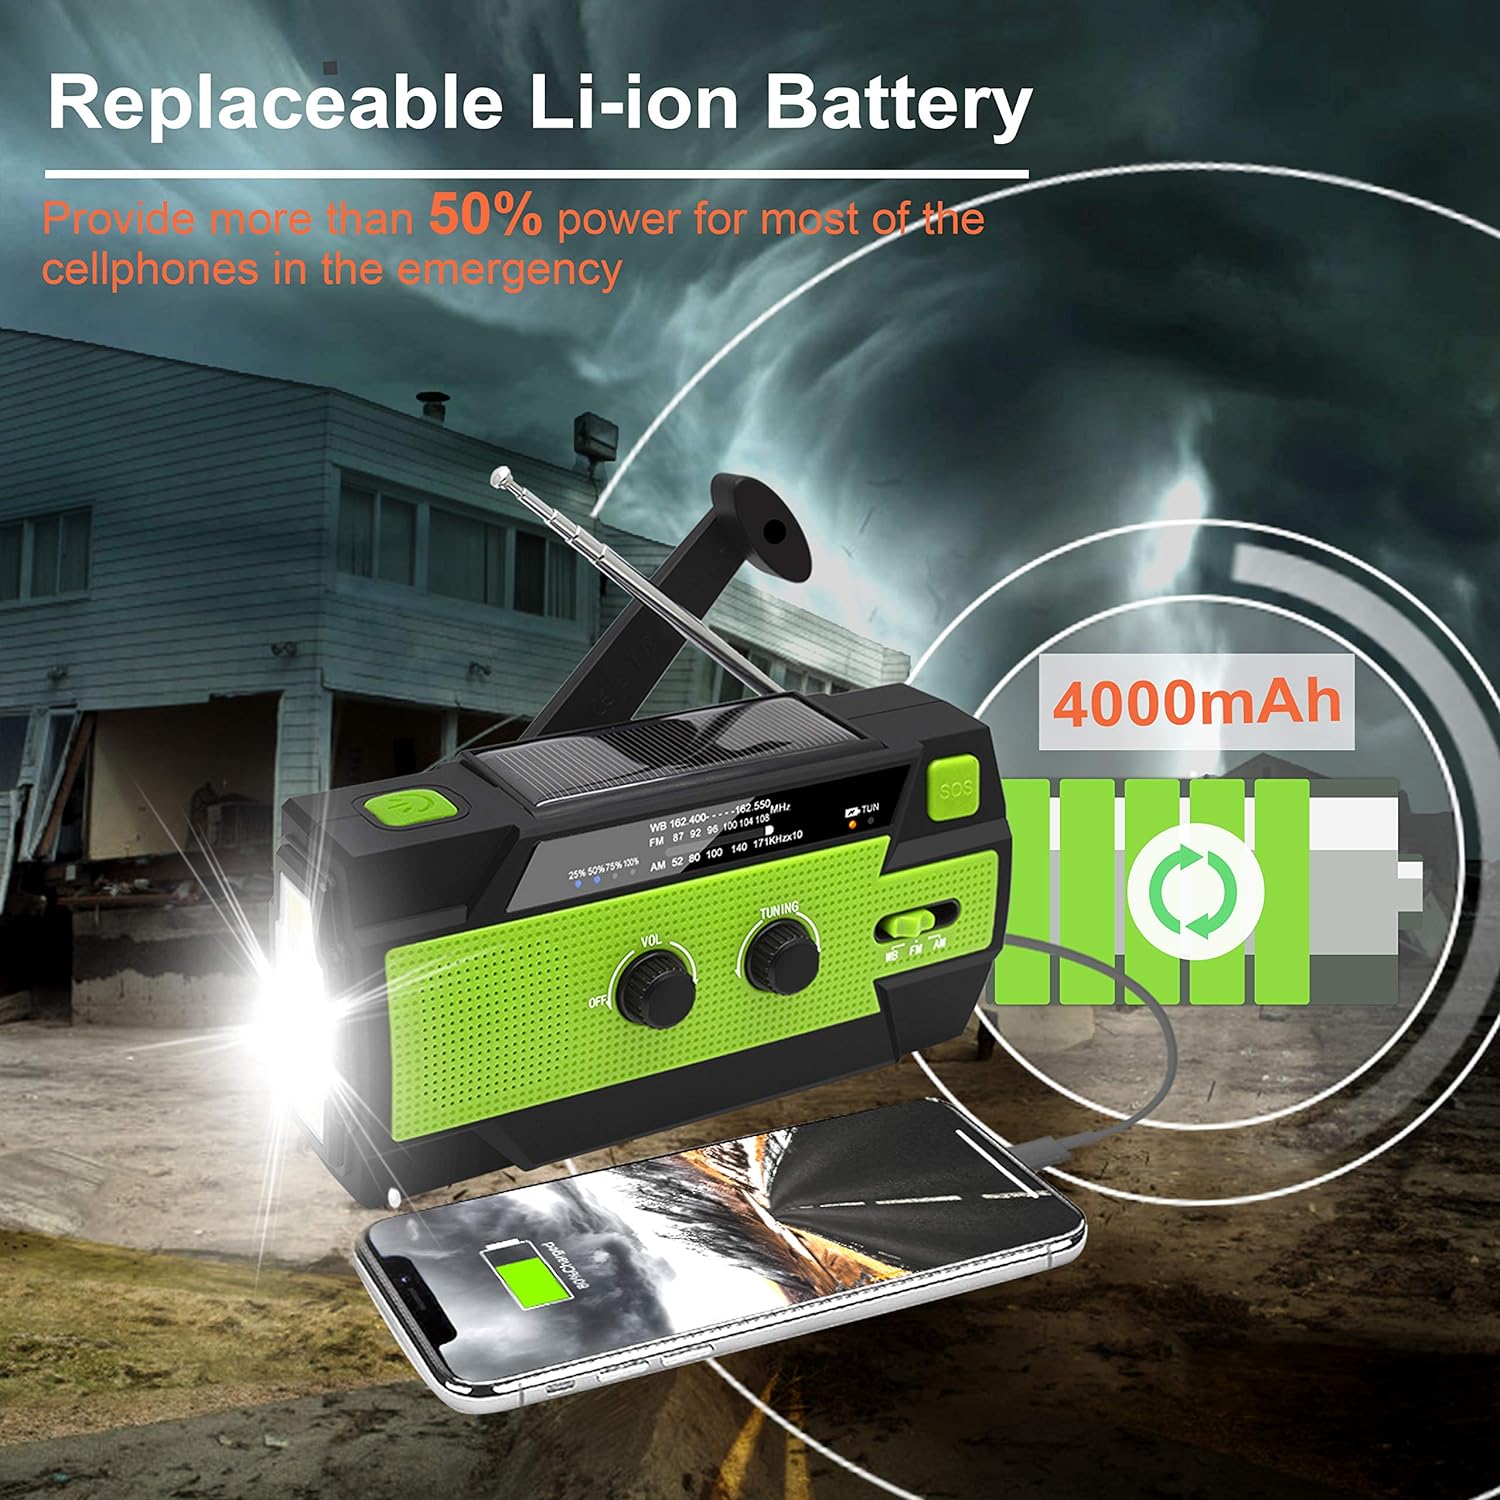 Professional Title: "4000mAh Emergency Crank Weather Radio - Solar Hand Crank Portable AM/FM/NOAA with 1W 3 Mode Flashlight, Motion Sensor Reading Lamp, Cell Phone Charger, and SOS - Ideal for Home and Emergency Situations (Green)"